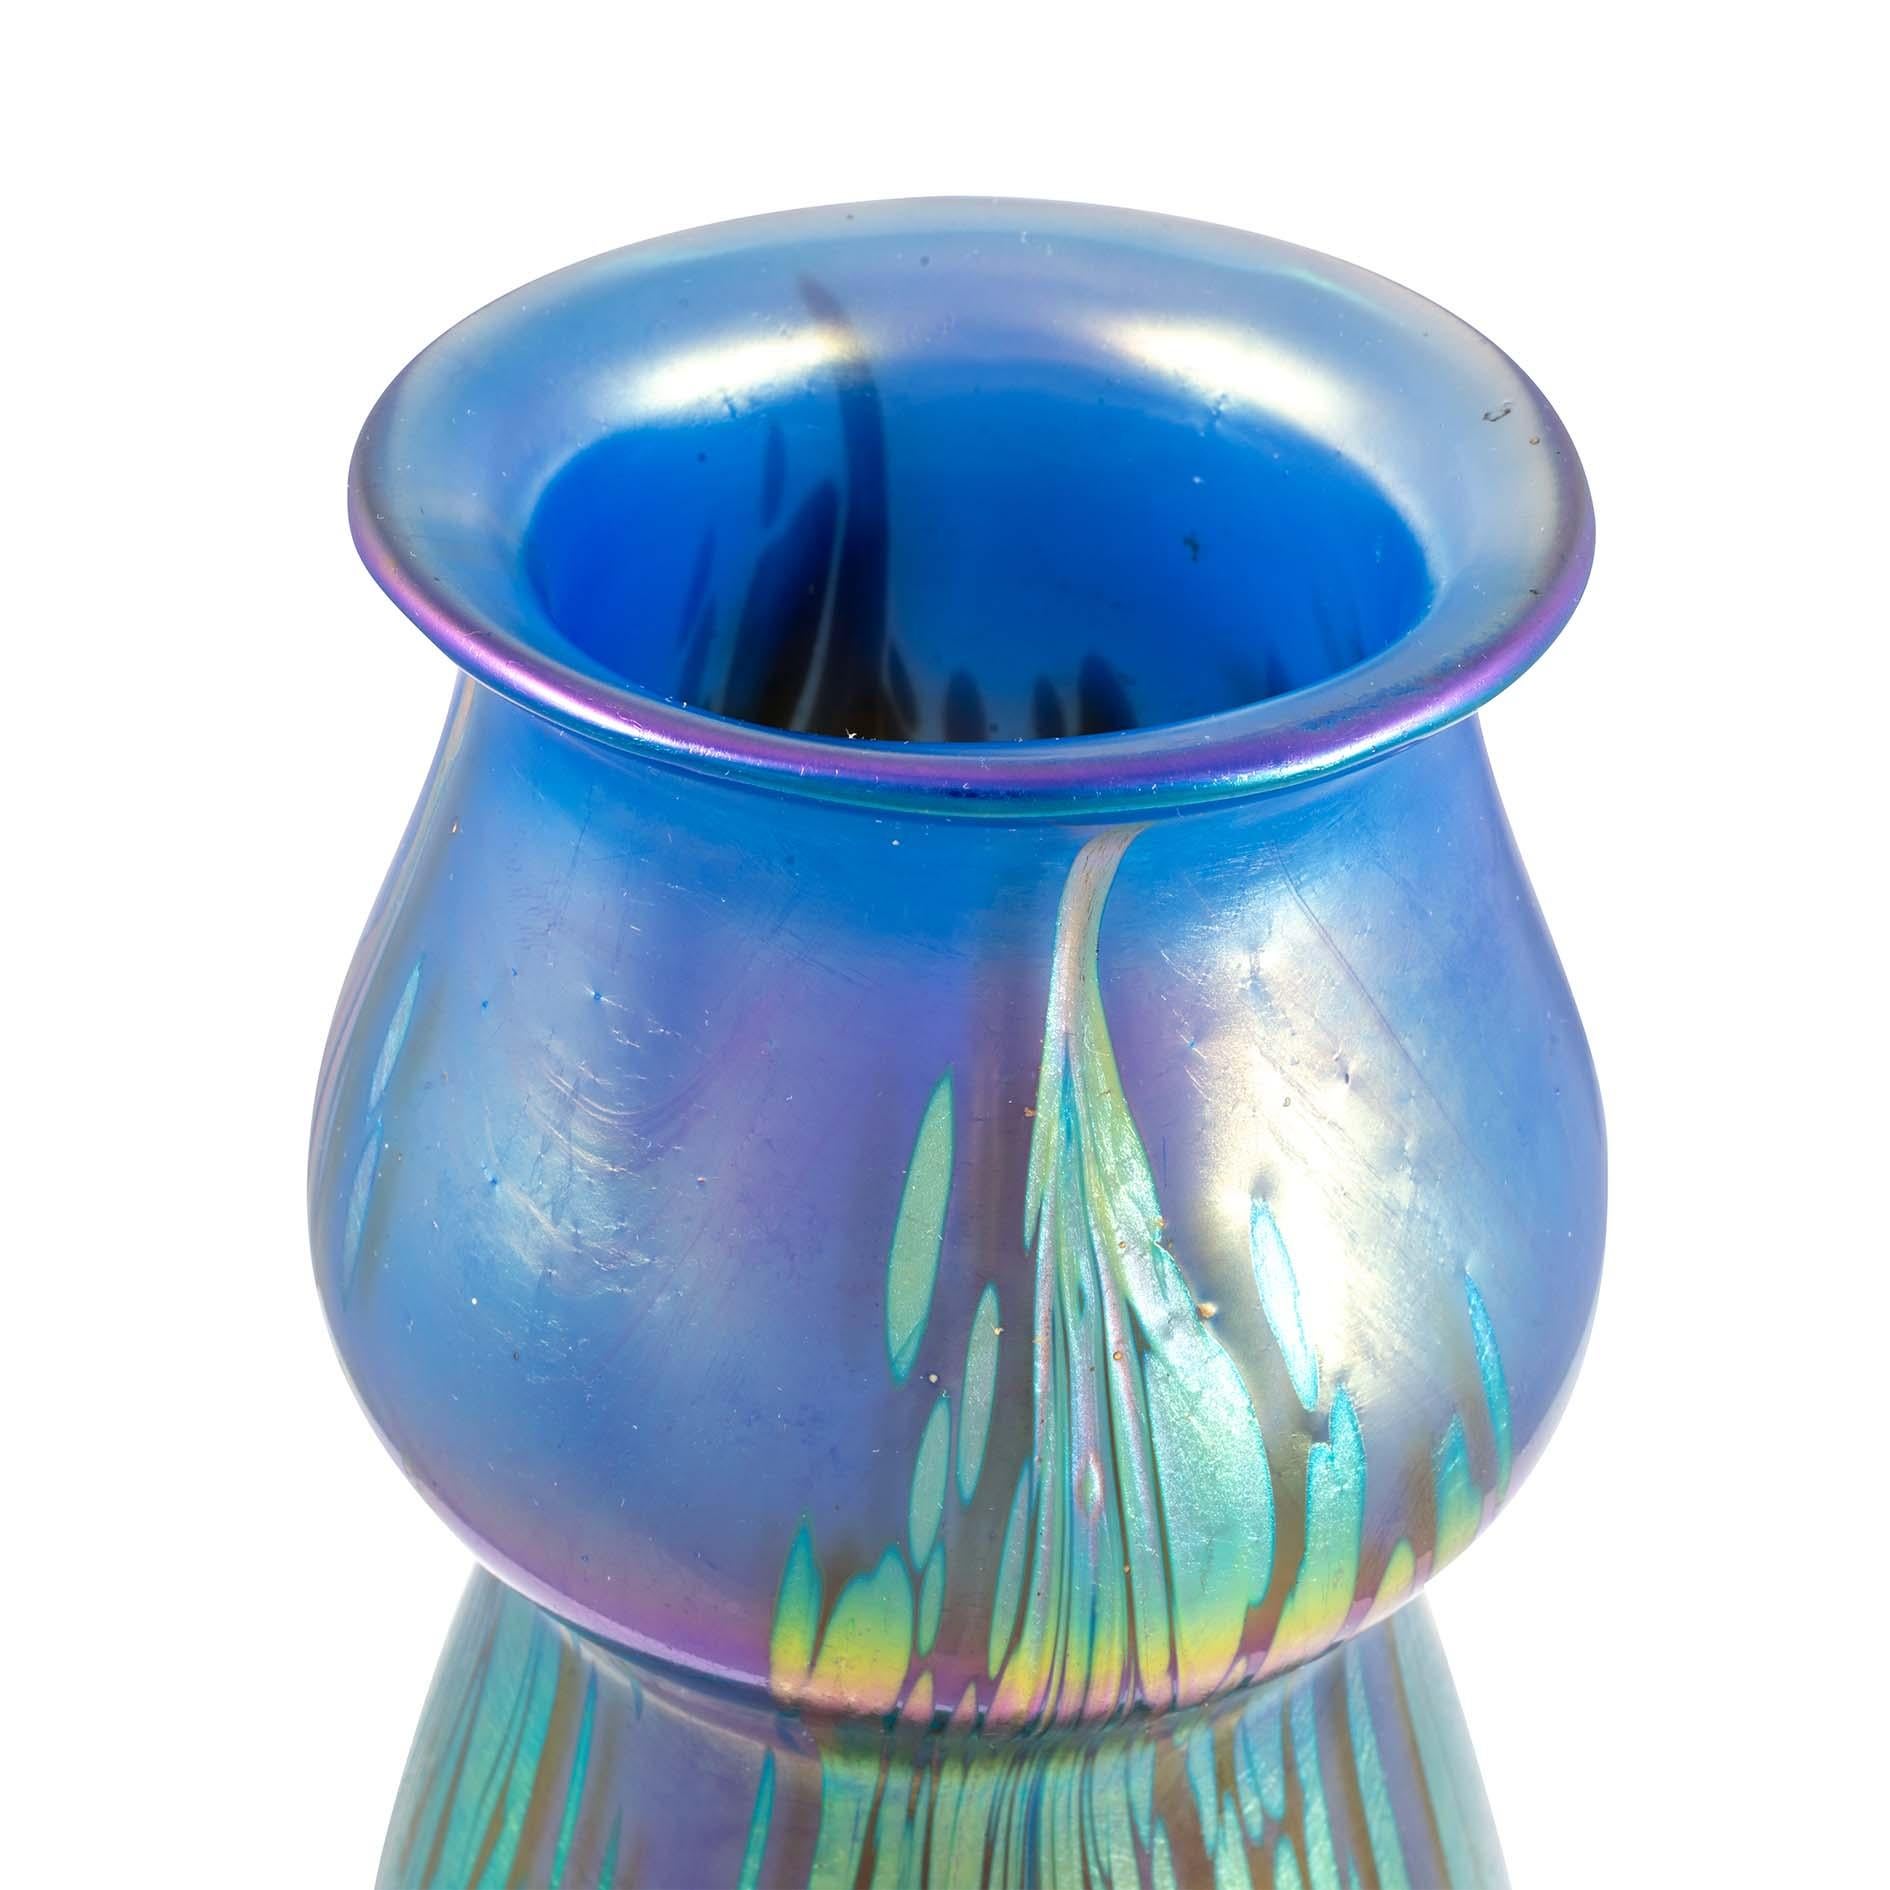 Vase manufactured by Johann Loetz Witwe Medici blue opal decoration ca. 1902 Austrian Jugendstil glass mould-blown reduced and iridescent Rainbow Colors

The decor 